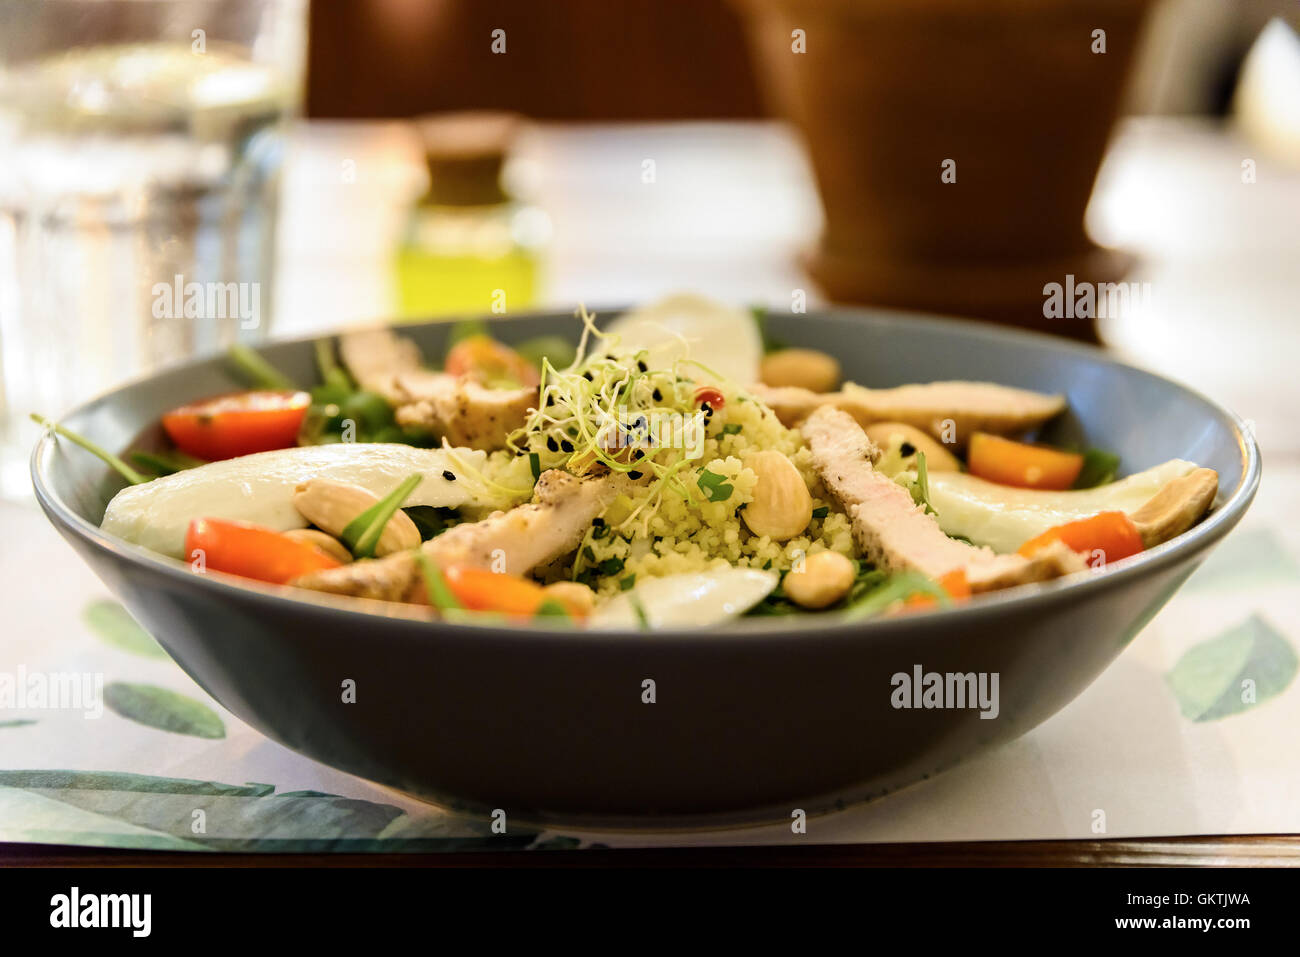 Fresh Salad With Mozzarella, Chicken, Tomatoes, Almonds And Onion Germs Stock Photo